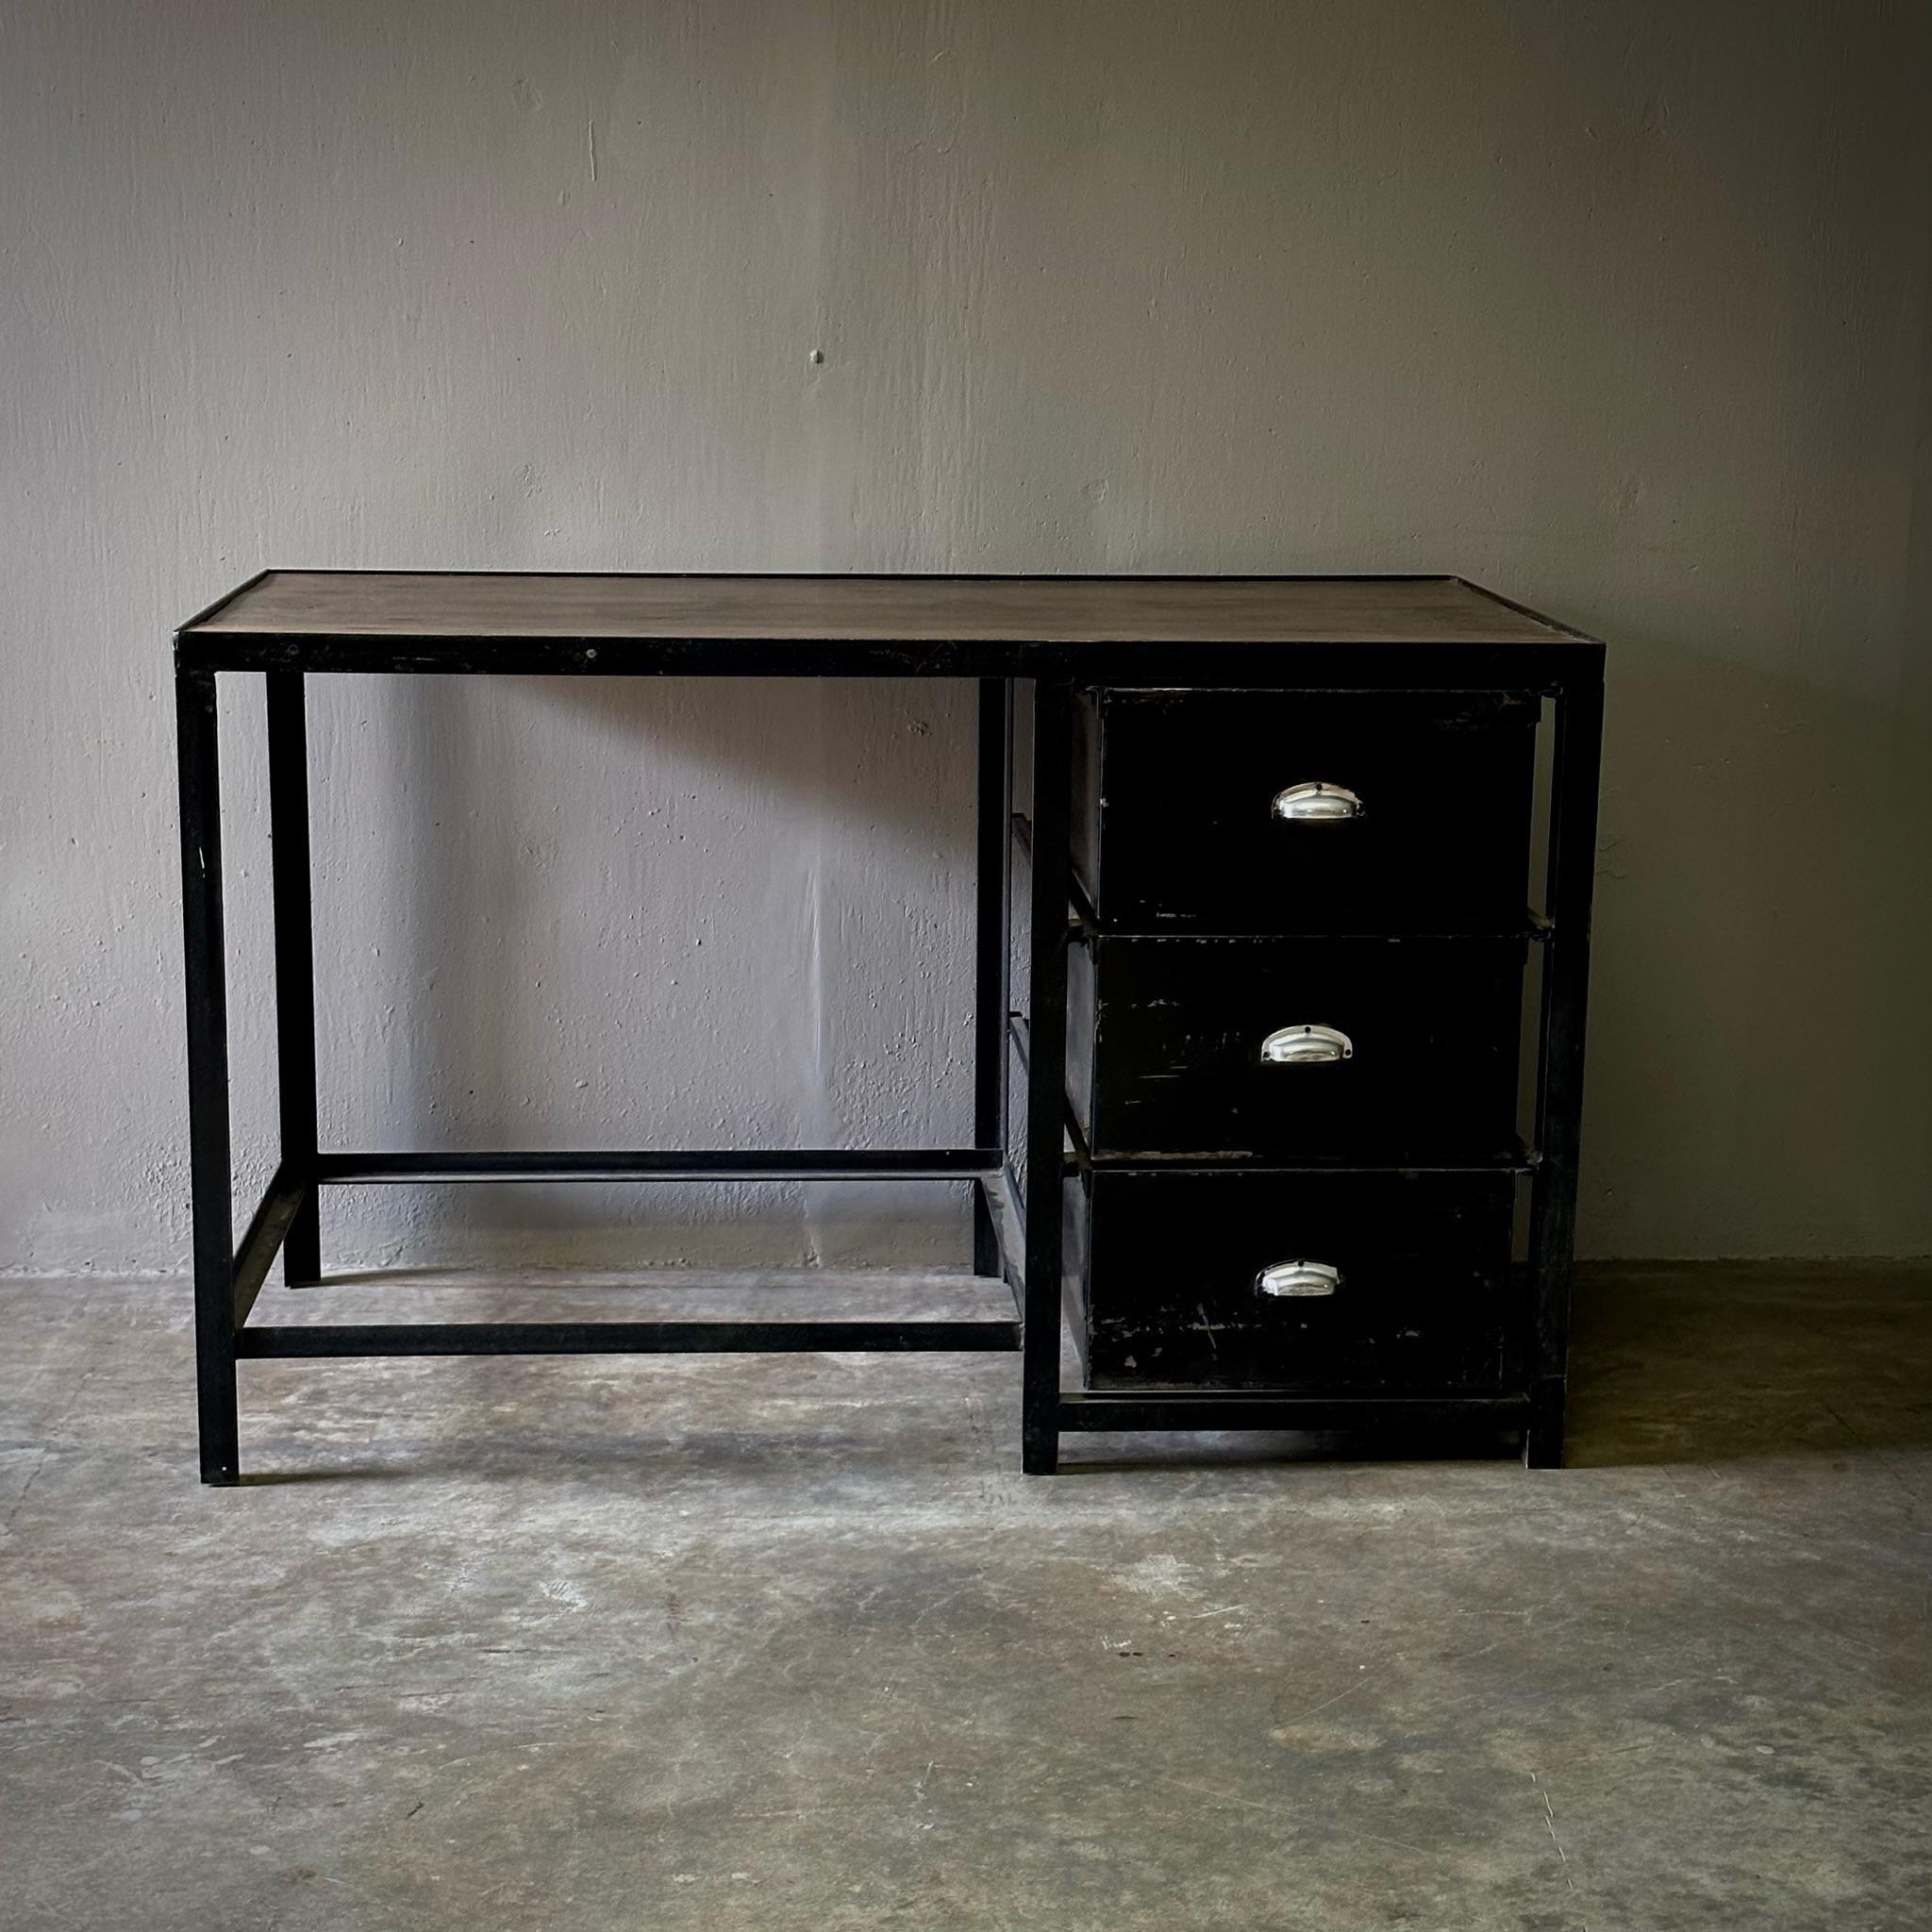 Dutch midcentury industrial black metal desk with three cupped ring drawers and rectangular wood top. A handsome work of midcentury industrial design with cool and utilitarian design accents. 

Netherlands, circa 1960

Dimensions: 51.2W x 27.6D